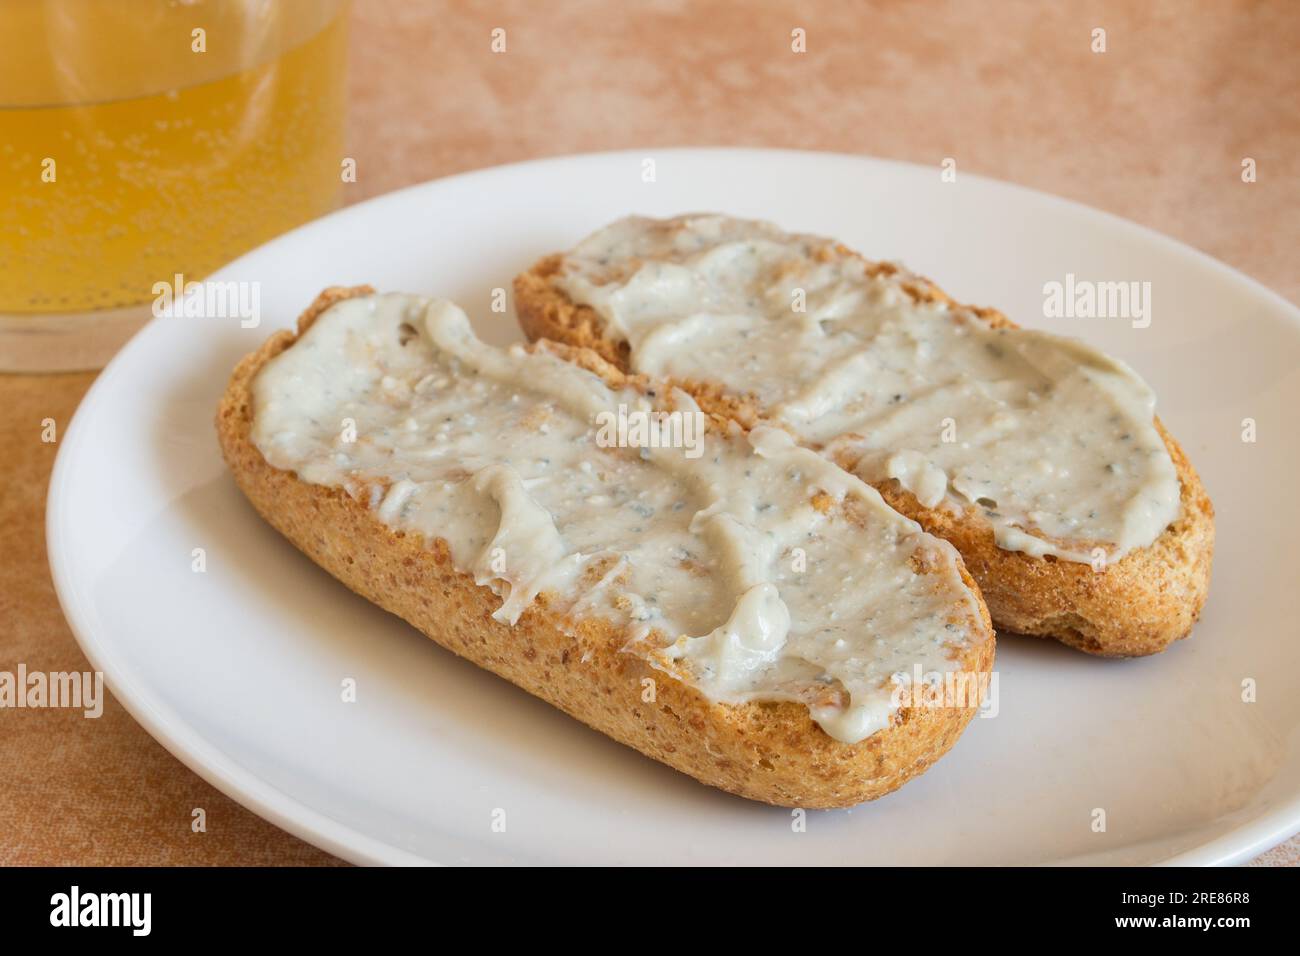 Close-up of Cabrales cream on toasted wholemeal bread with a shot of cider in the background. Traditional Spanish recipes and blue cheese. Stock Photo